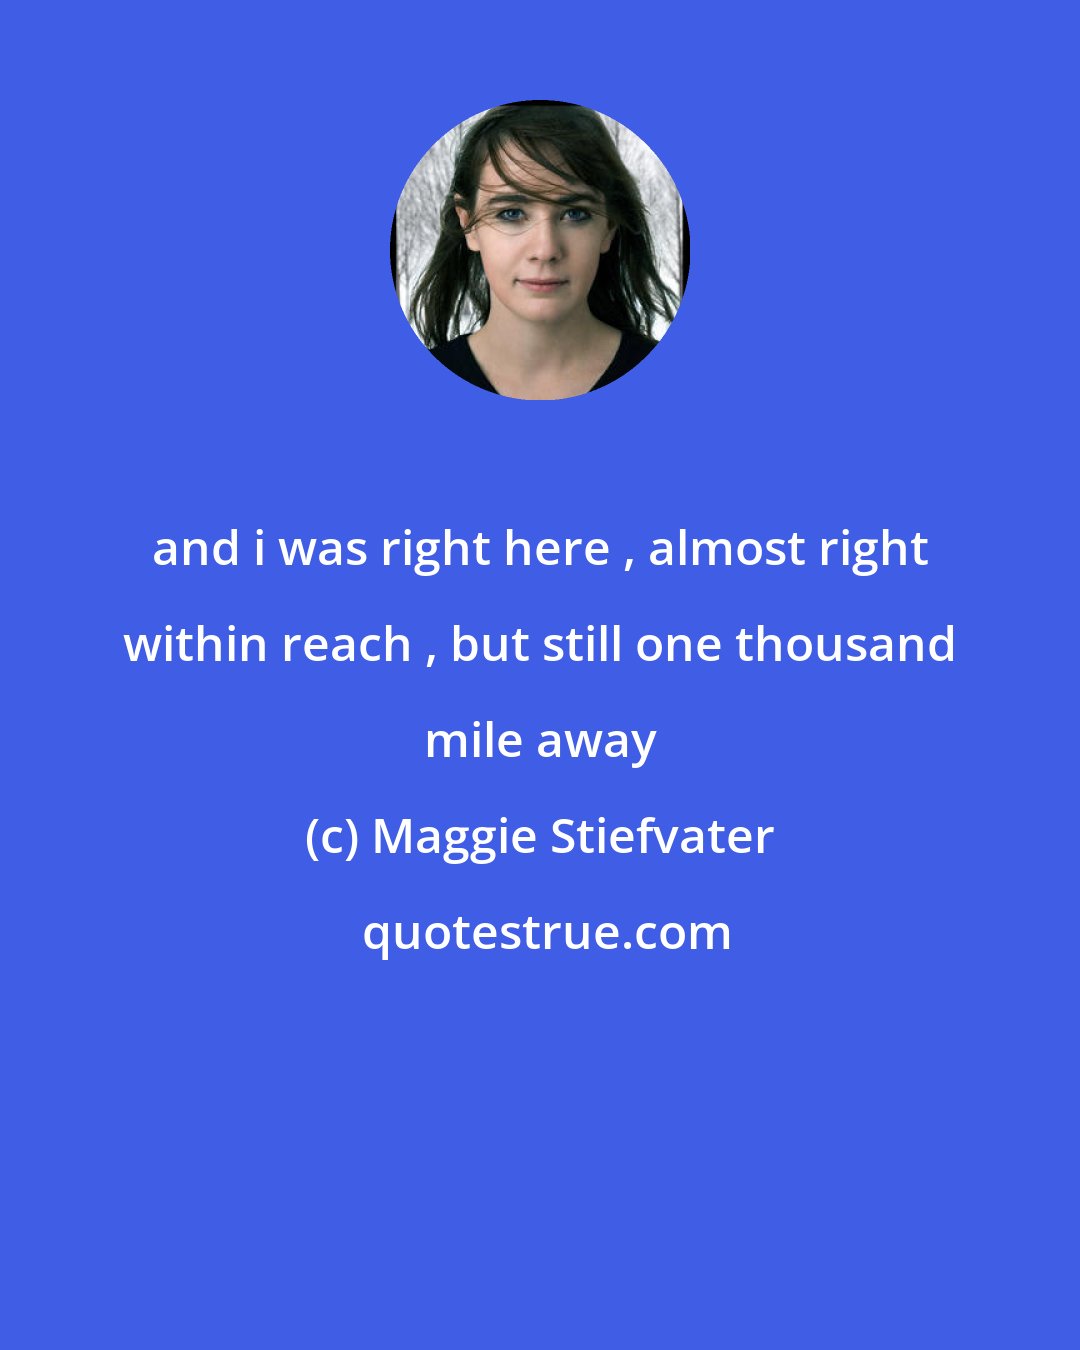 Maggie Stiefvater: and i was right here , almost right within reach , but still one thousand mile away